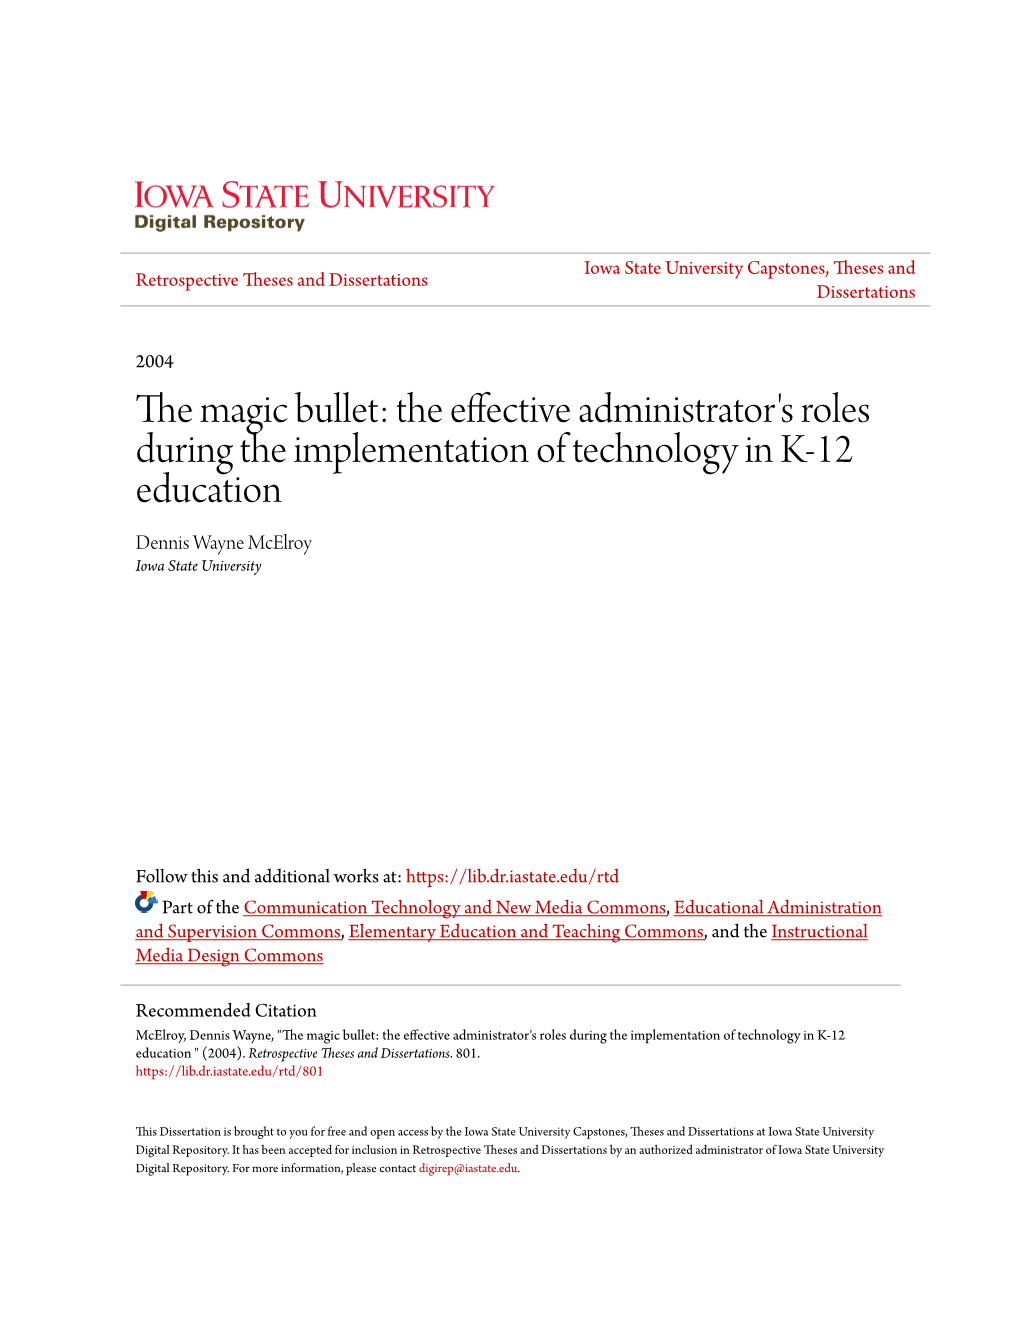 The Magic Bullet: the Effective Administrator's Roles During the Implementation of Technology in K-12 Education